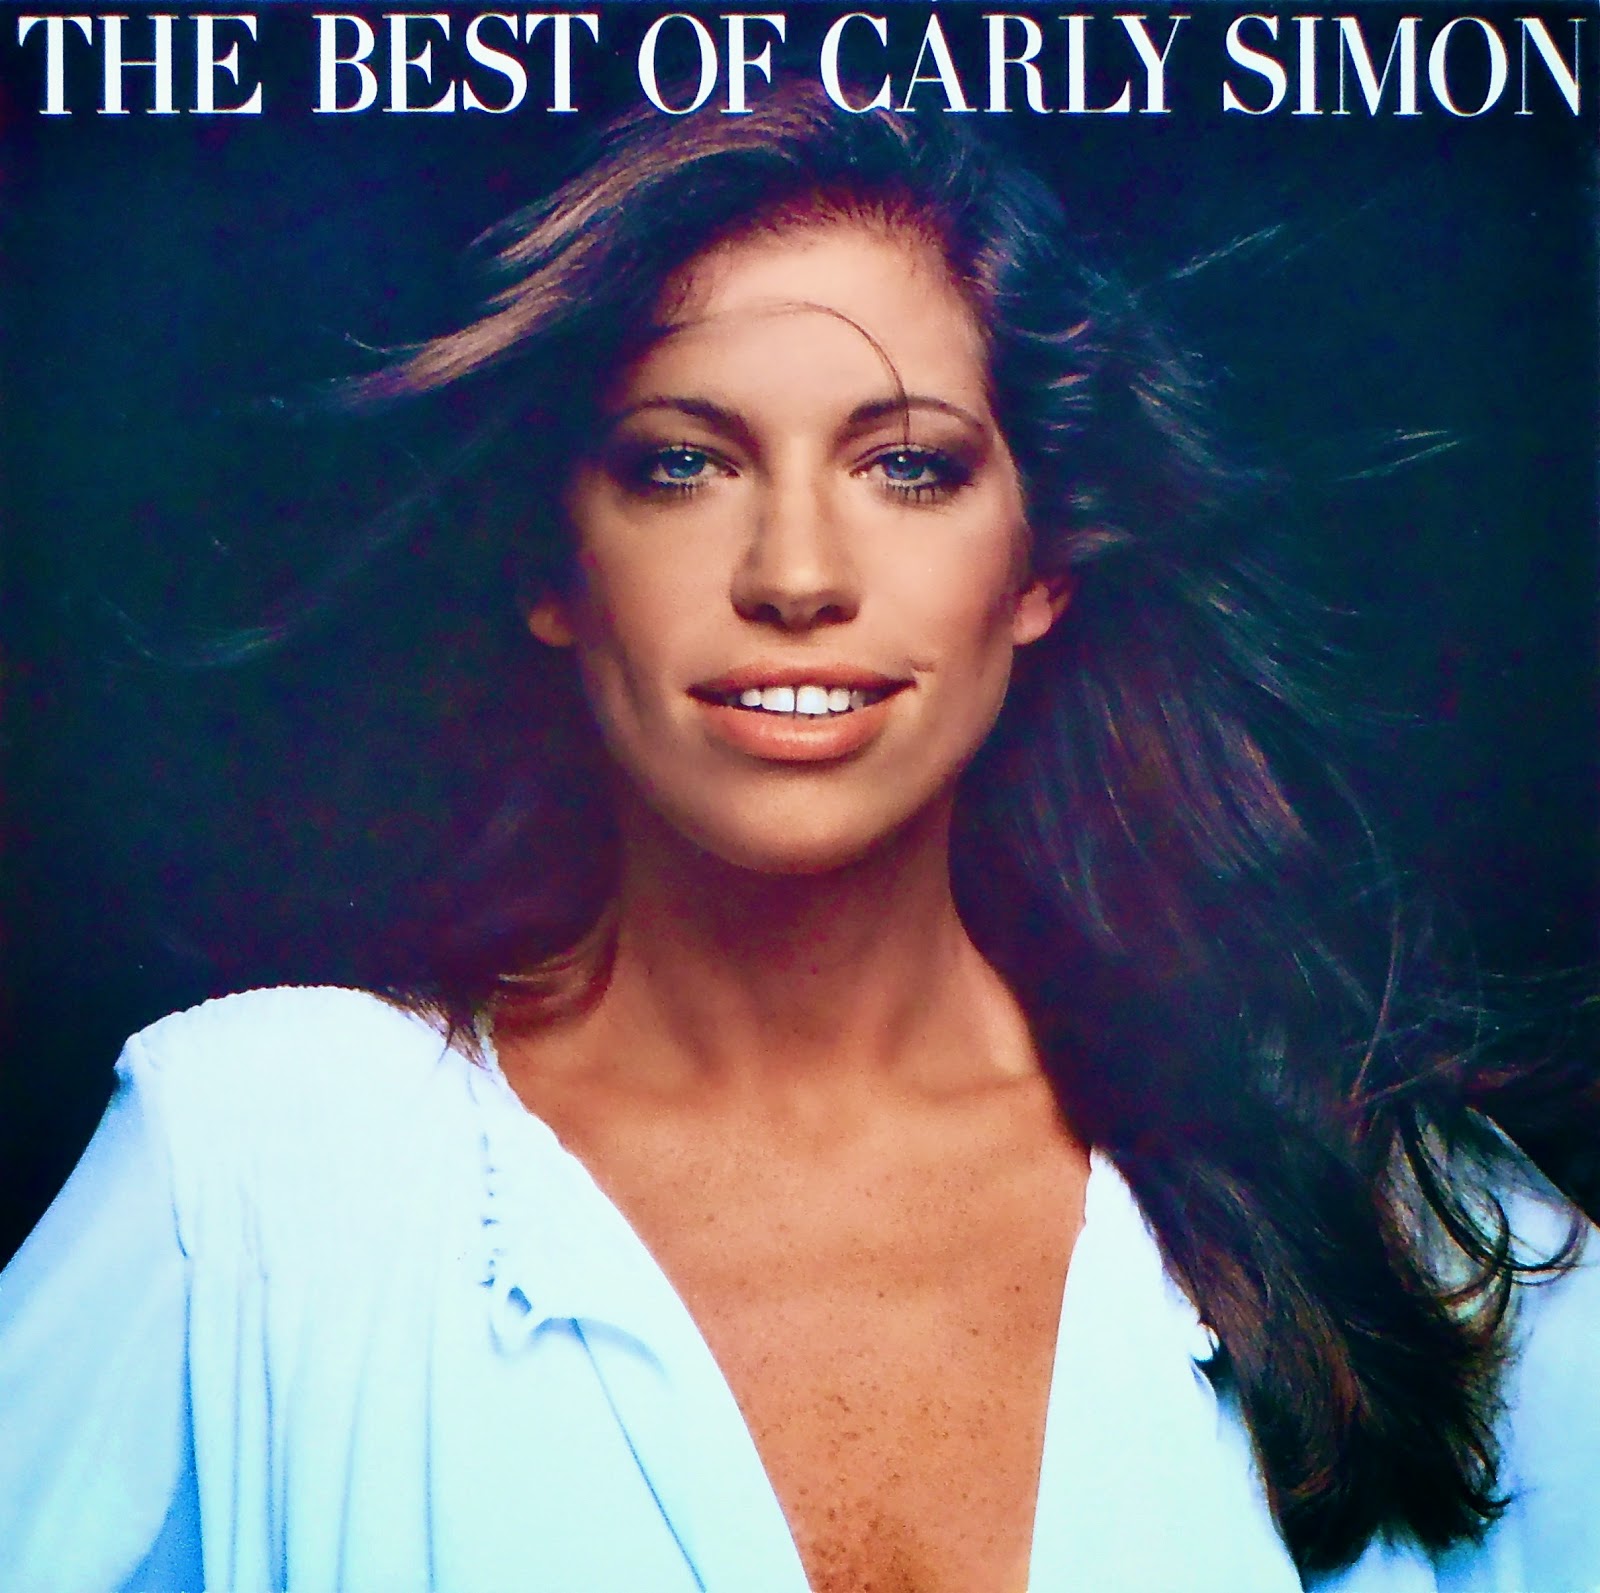 Carly Simon - The Best Of.